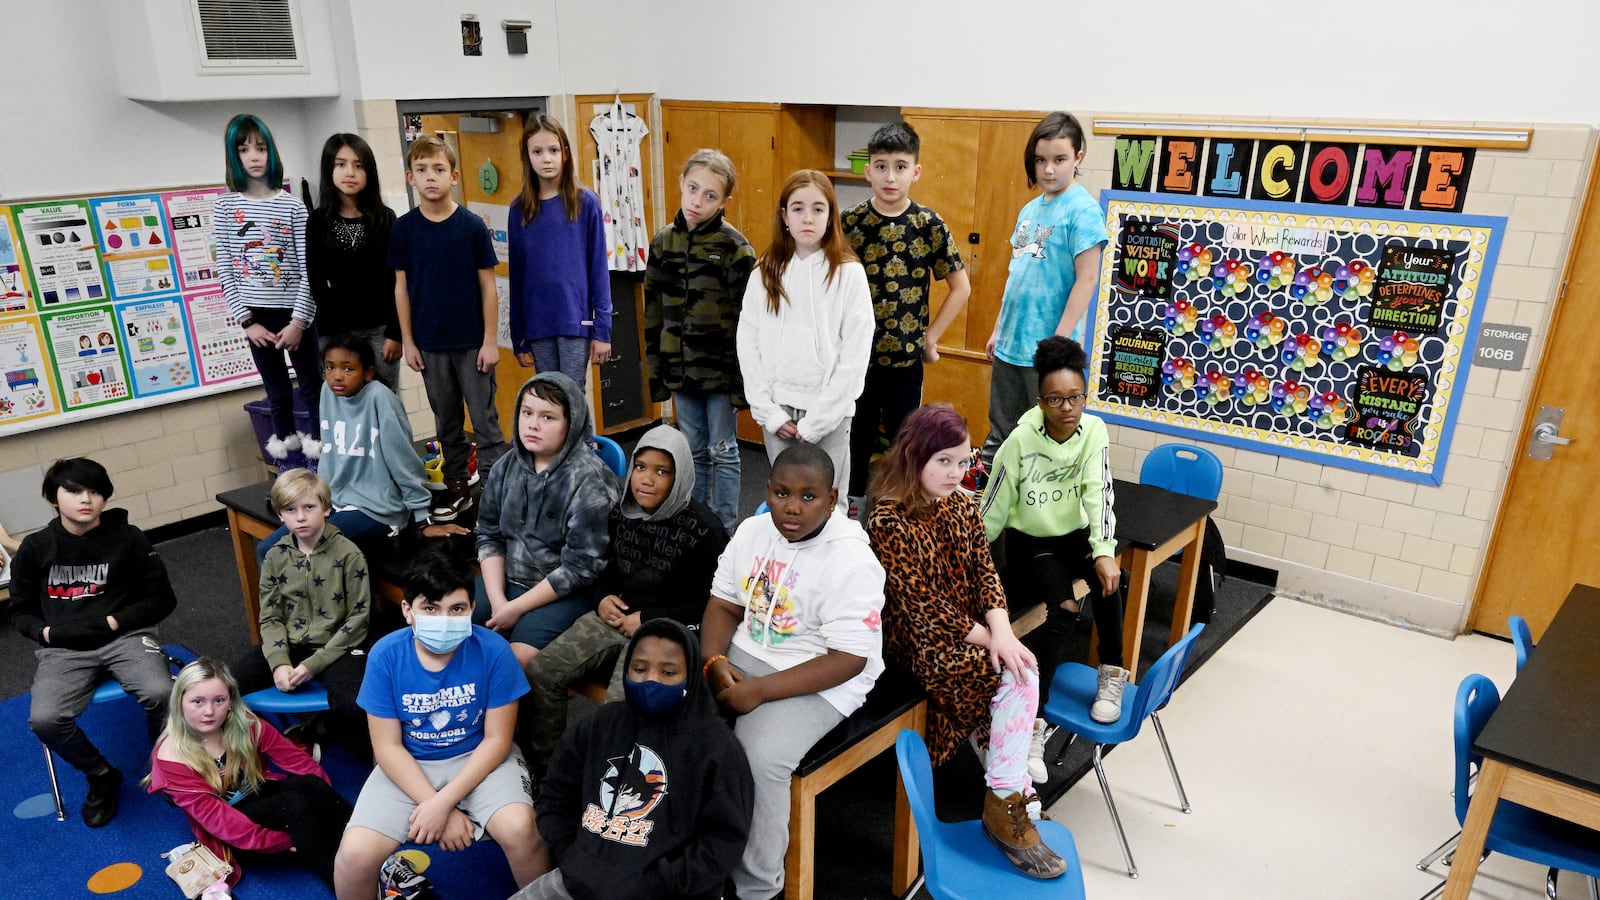 An elementary class poses for a portrait in a classroom.